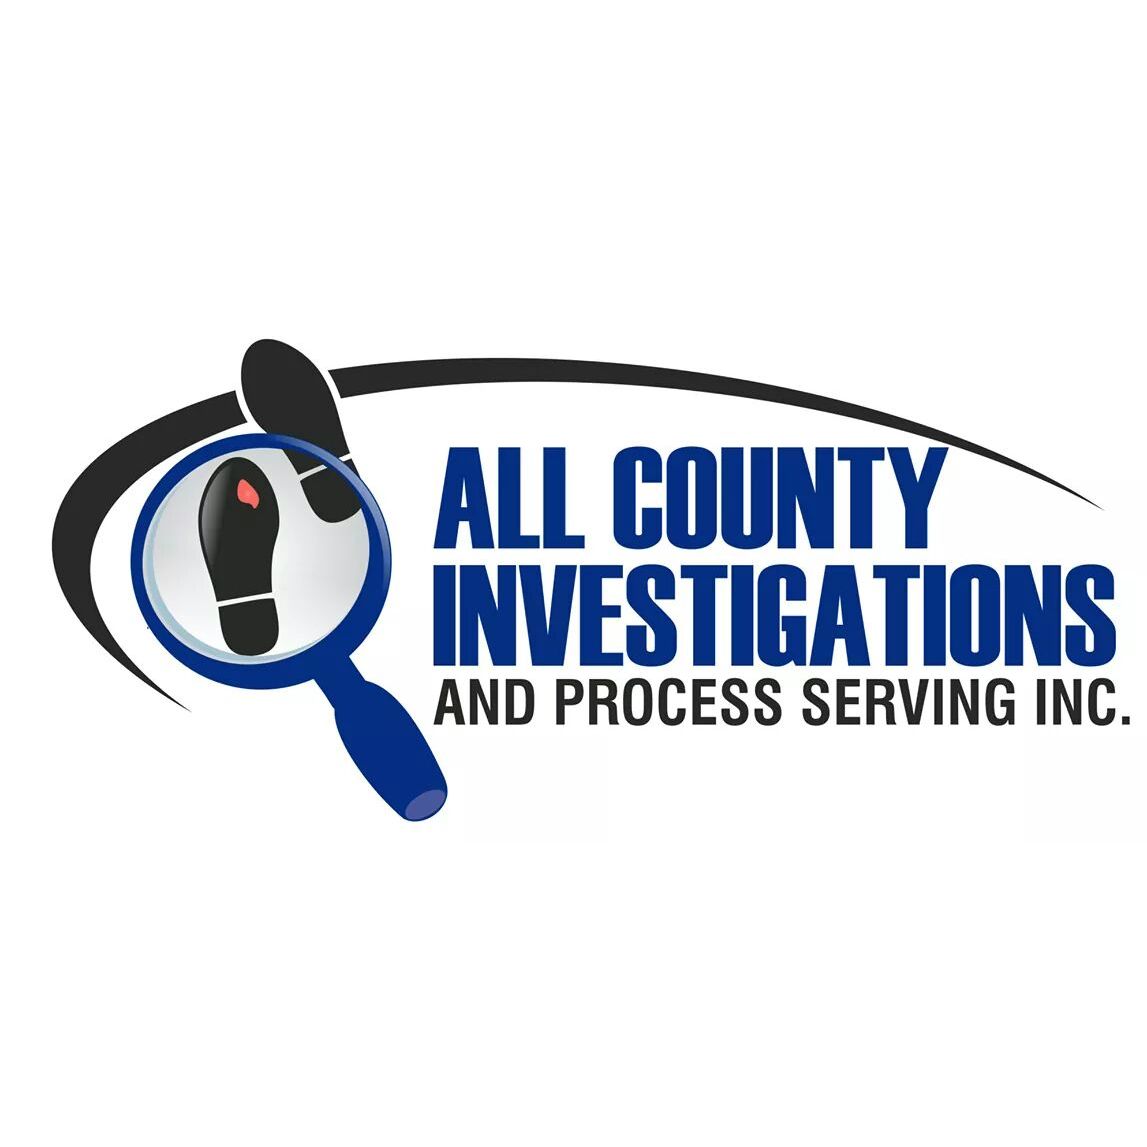 All County Investigations and Process Serving, Inc.